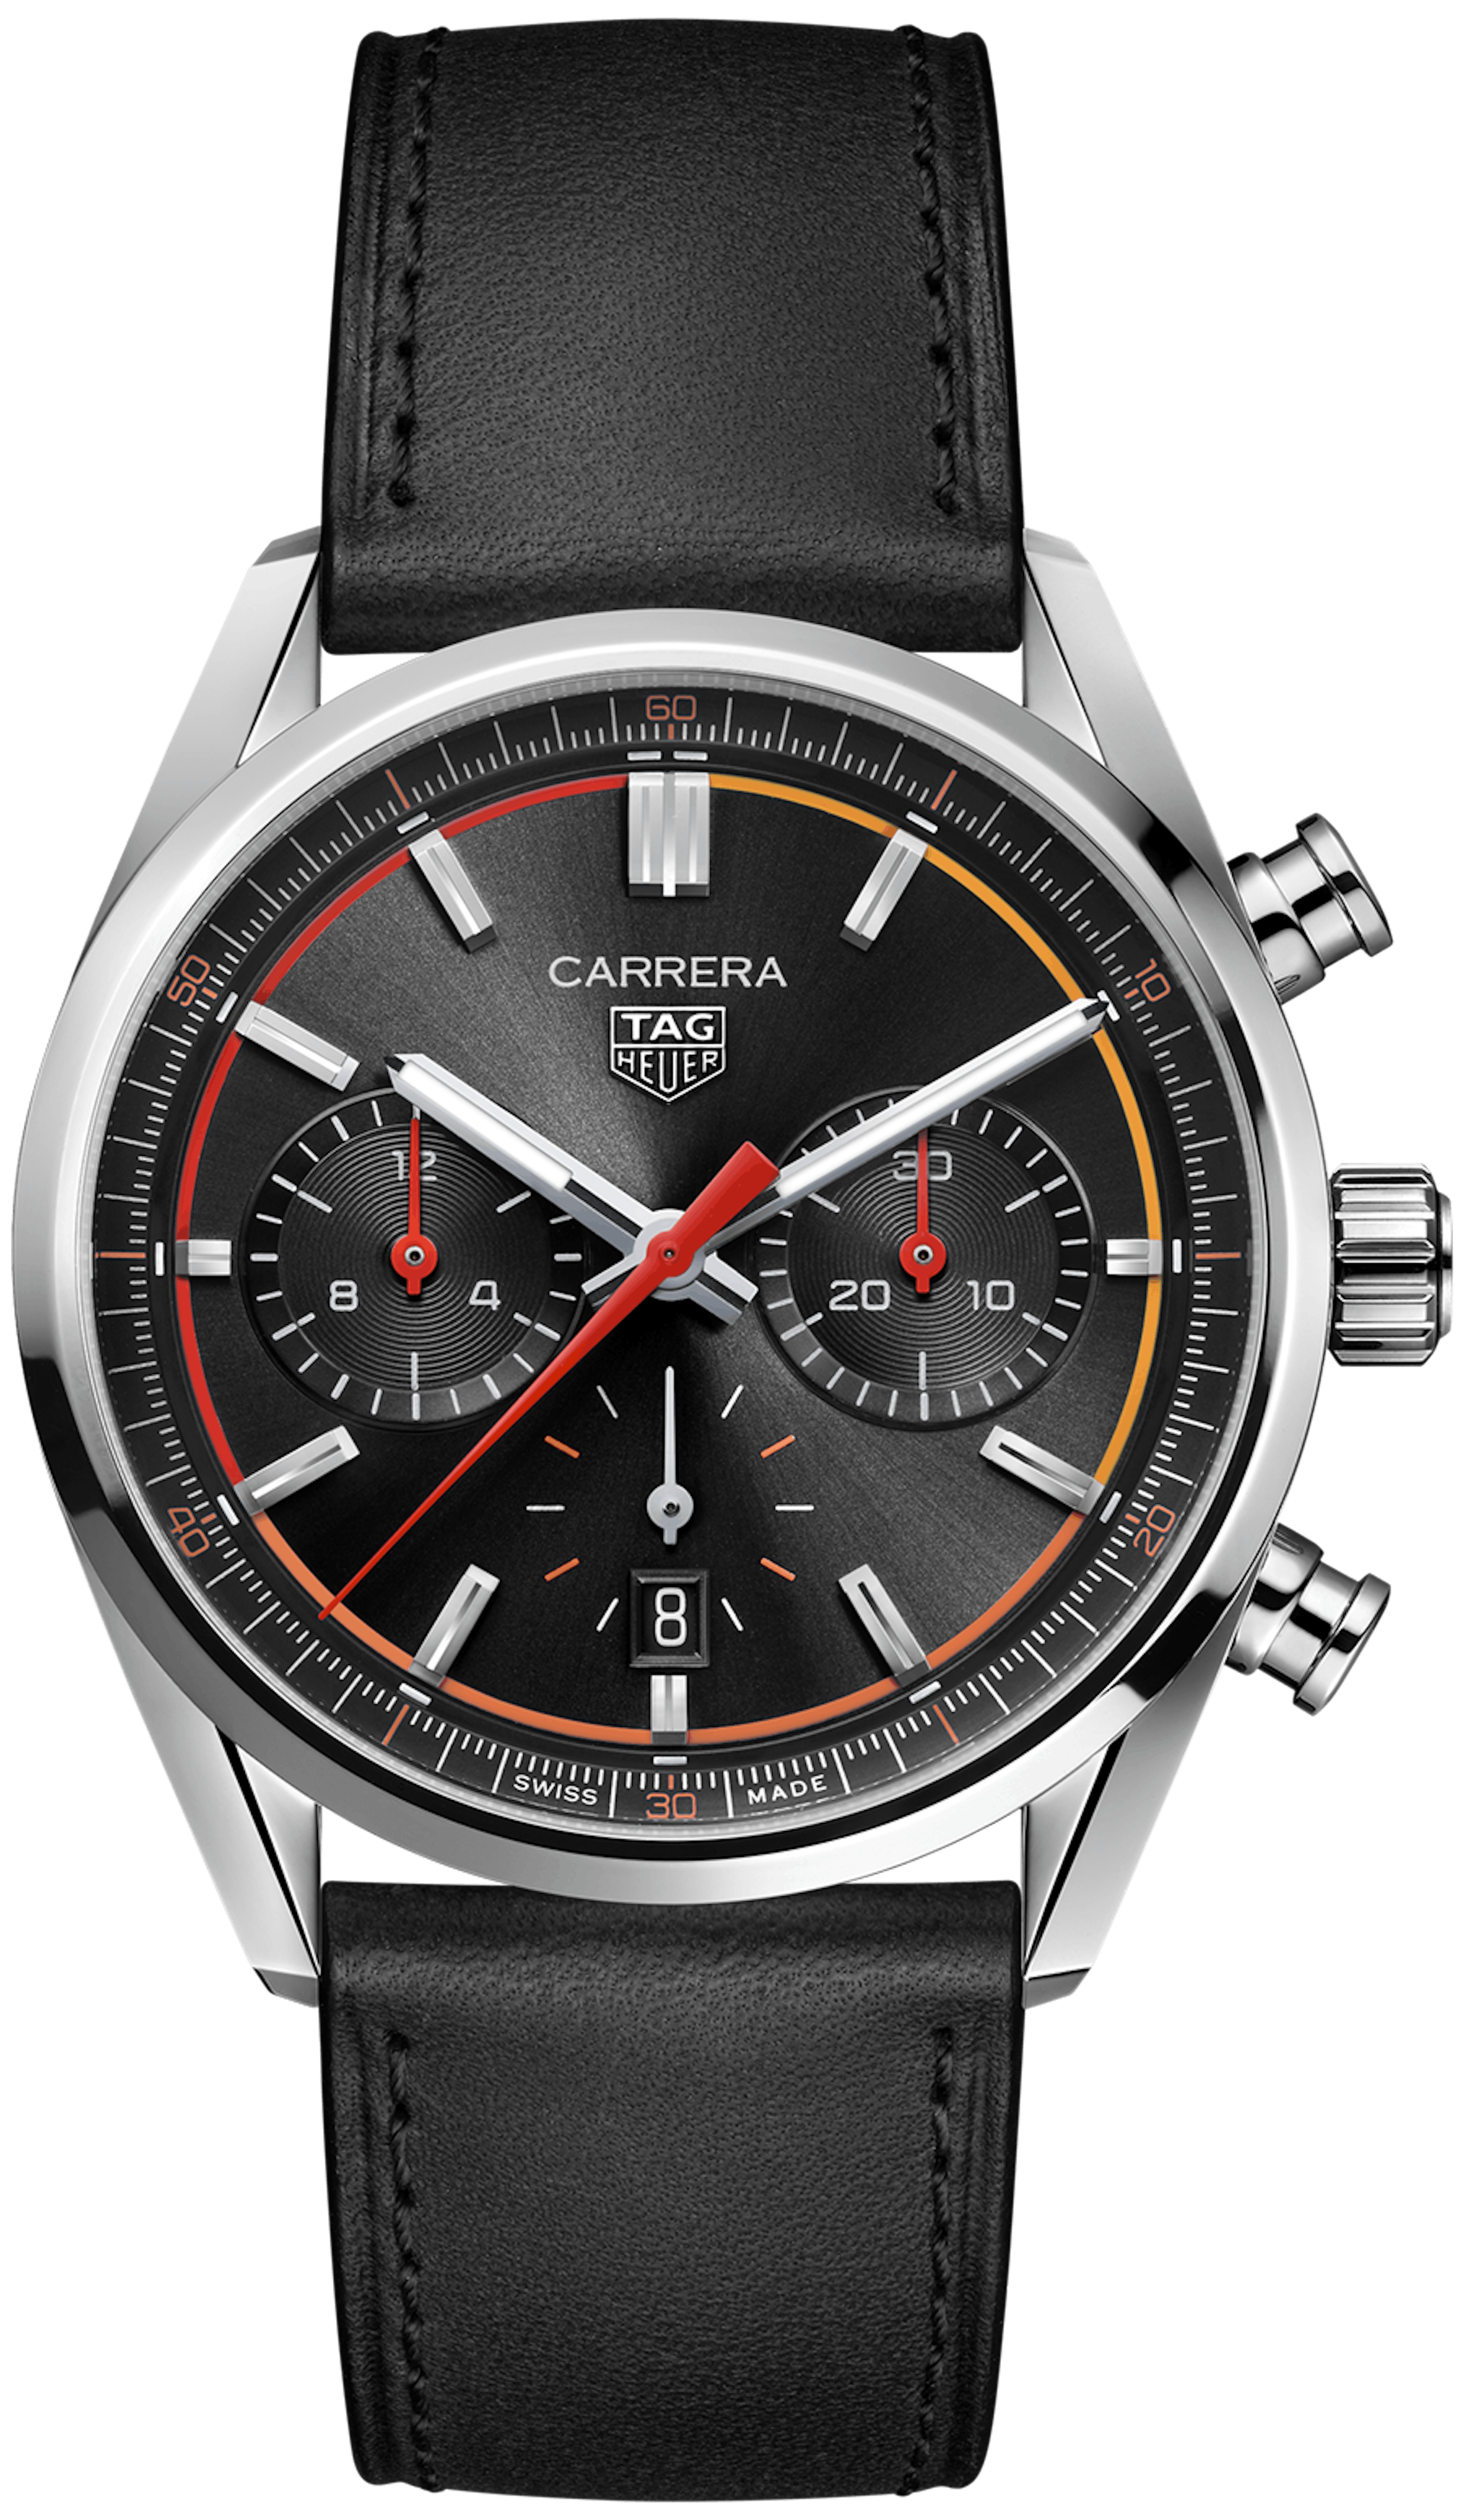 The new TAG Heuer Carrera, a watch named after a historic rally across Mexico held in the 1950s.